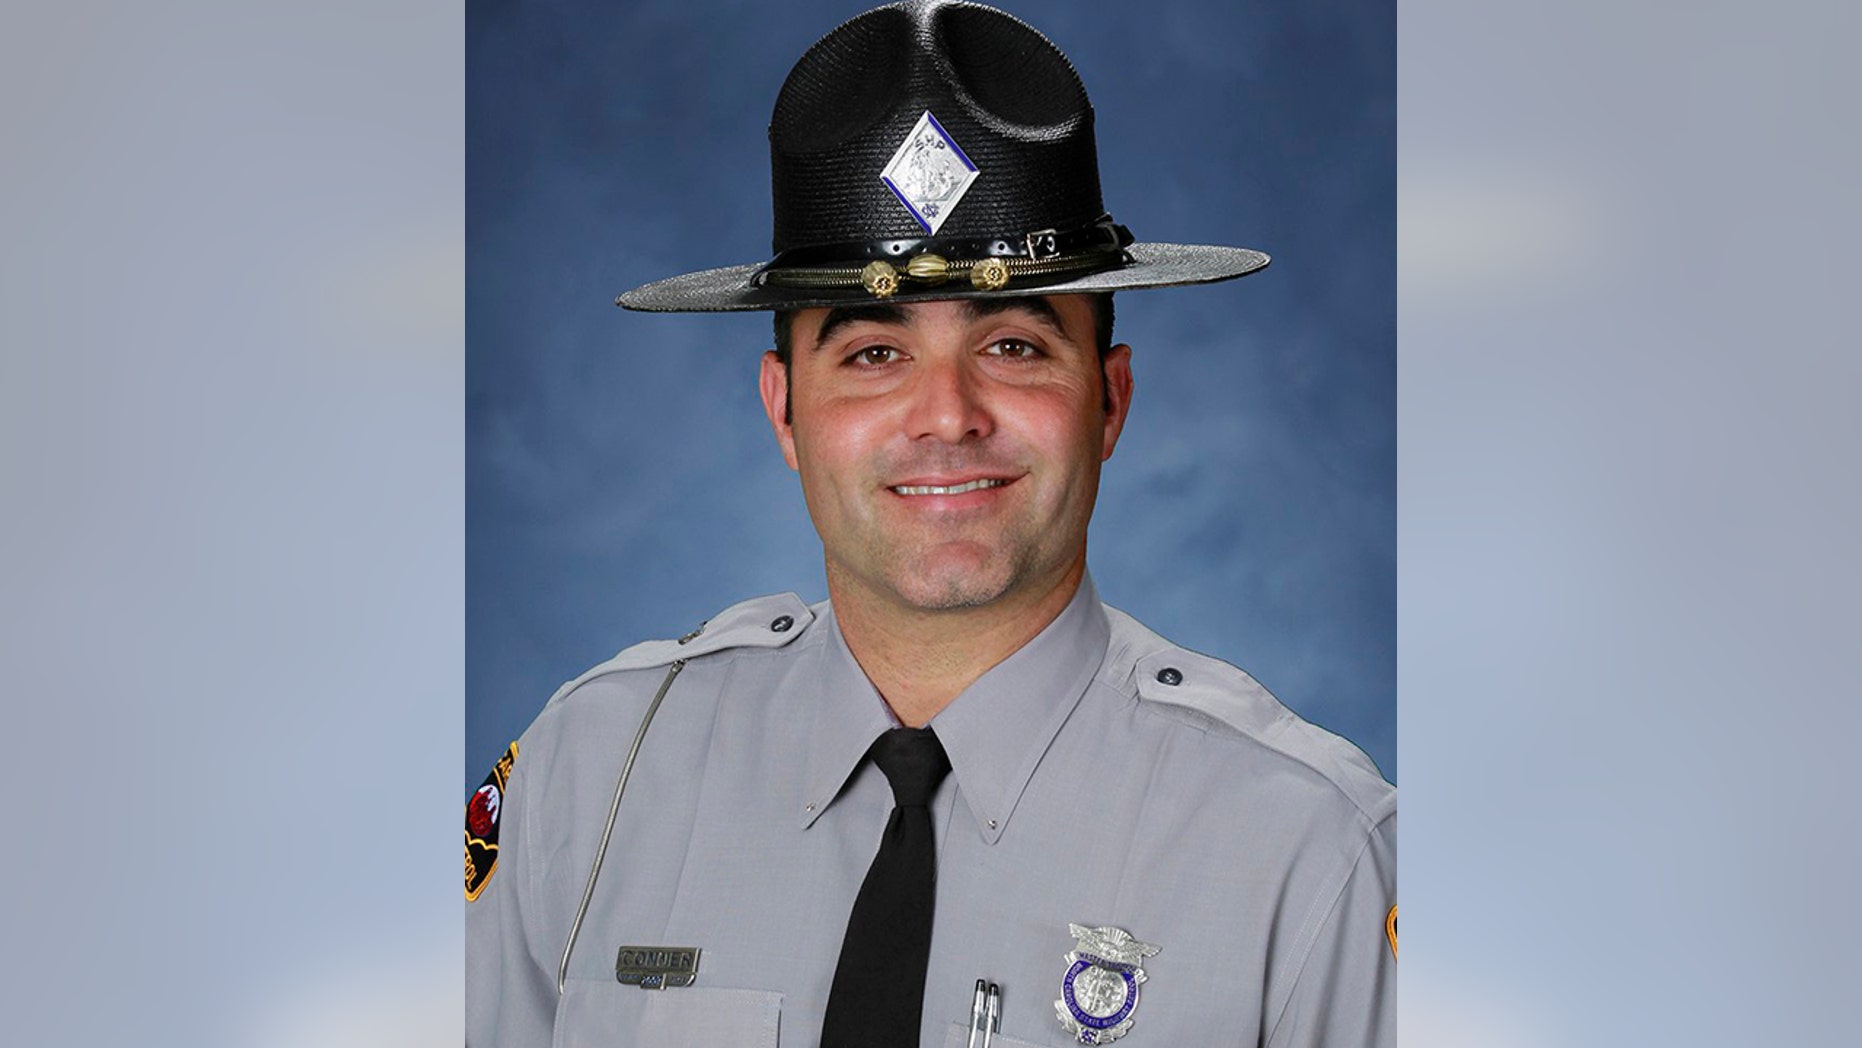 Private Kevin Conner, 38, was shot dead early Wednesday during a roadside check.